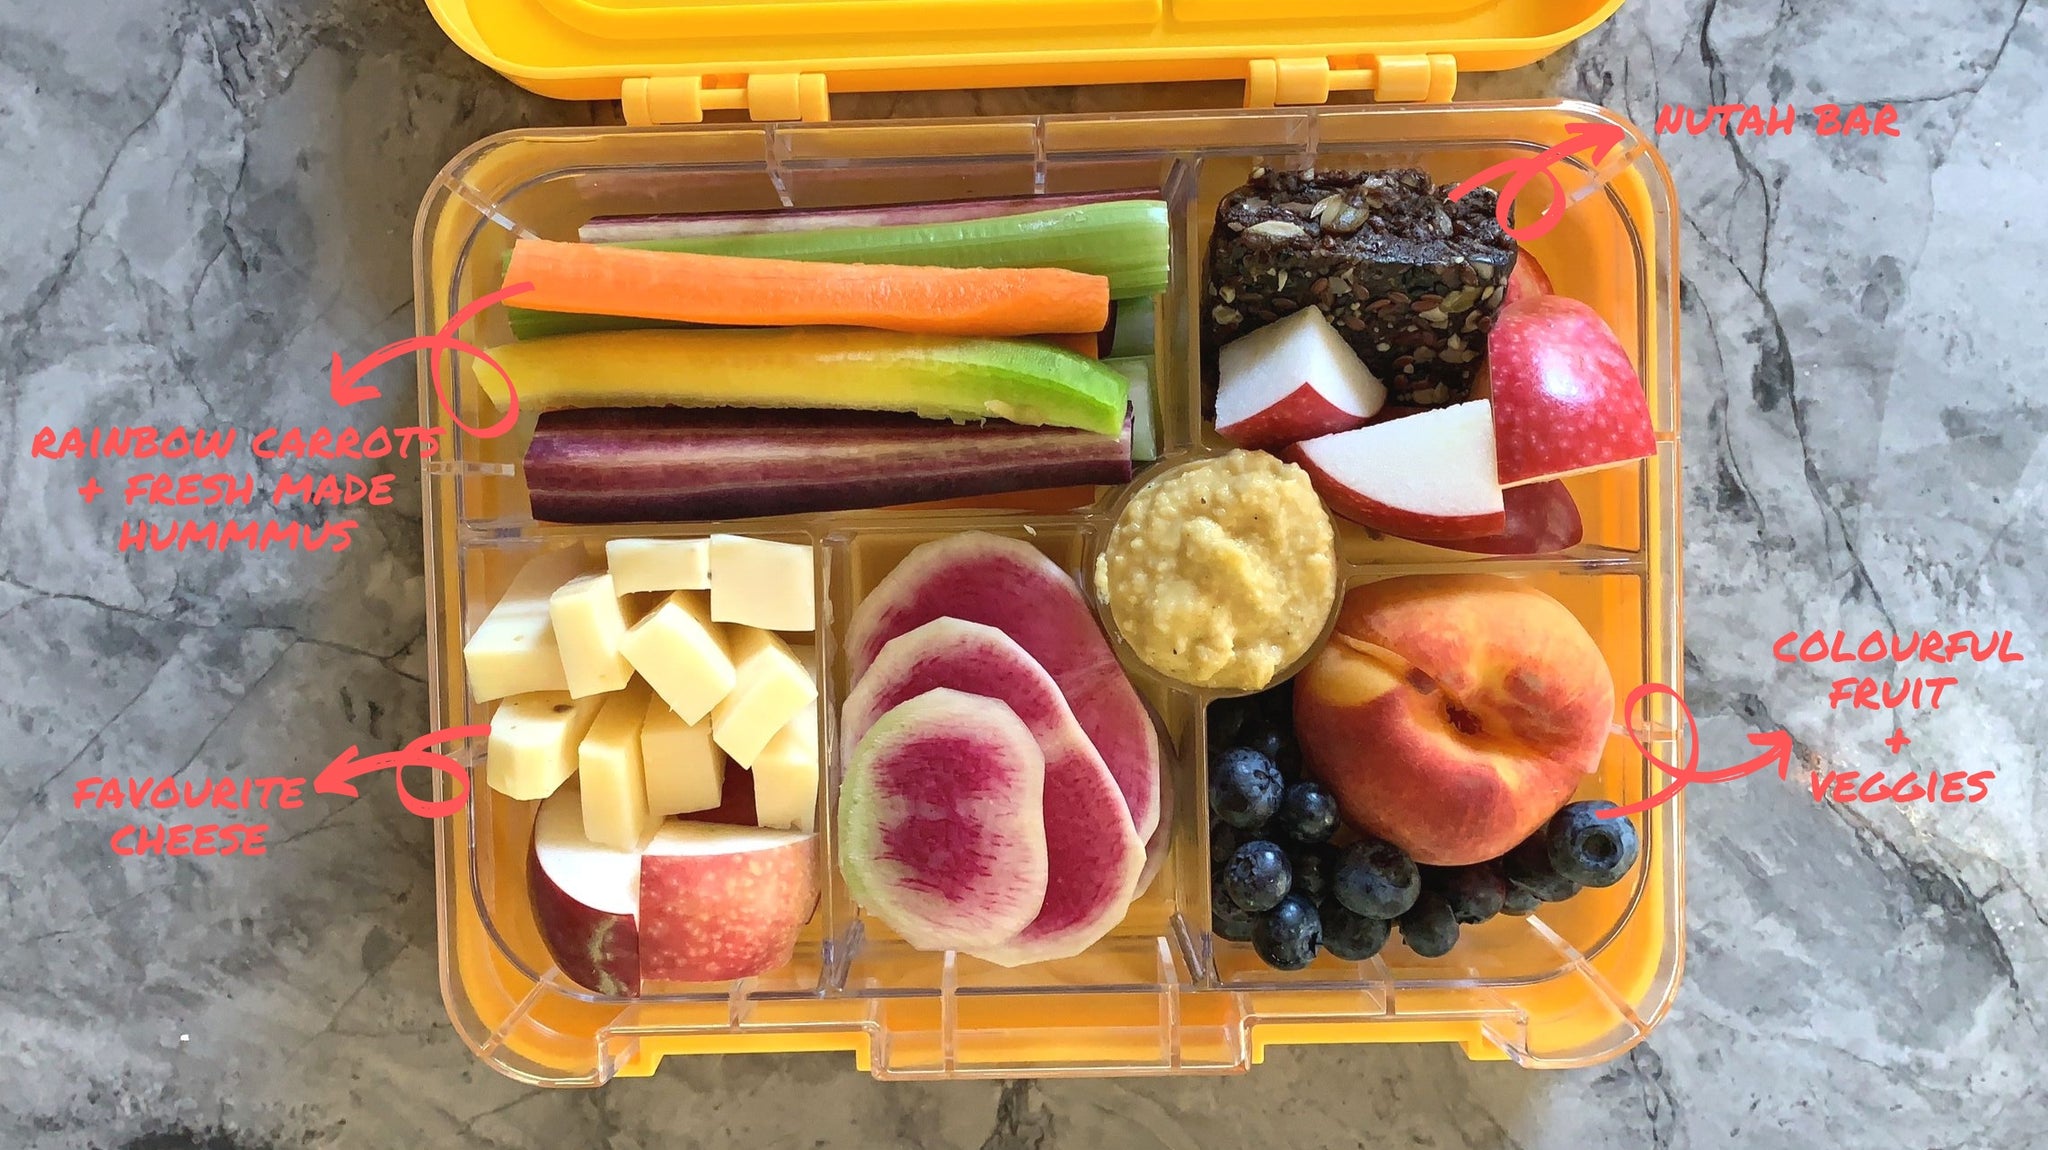 Fruit and vegetable bento box lunch idea from Legacy Greens grocery store in downtown Kitchener